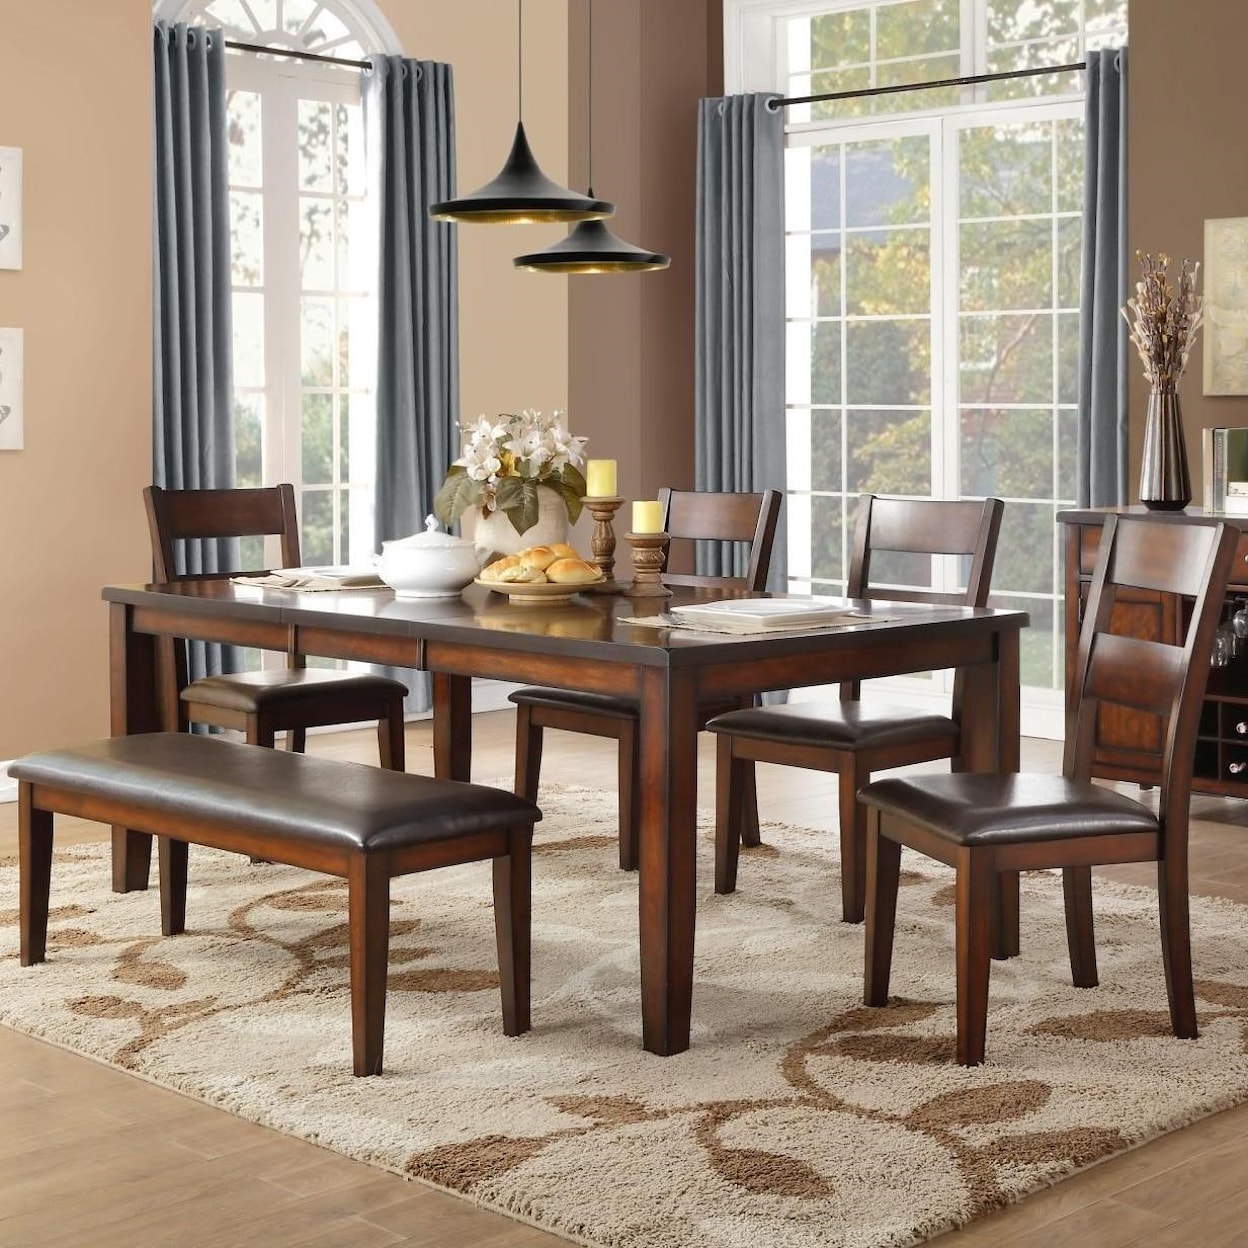 Homelegance Mantello Table & Chair Set with Bench